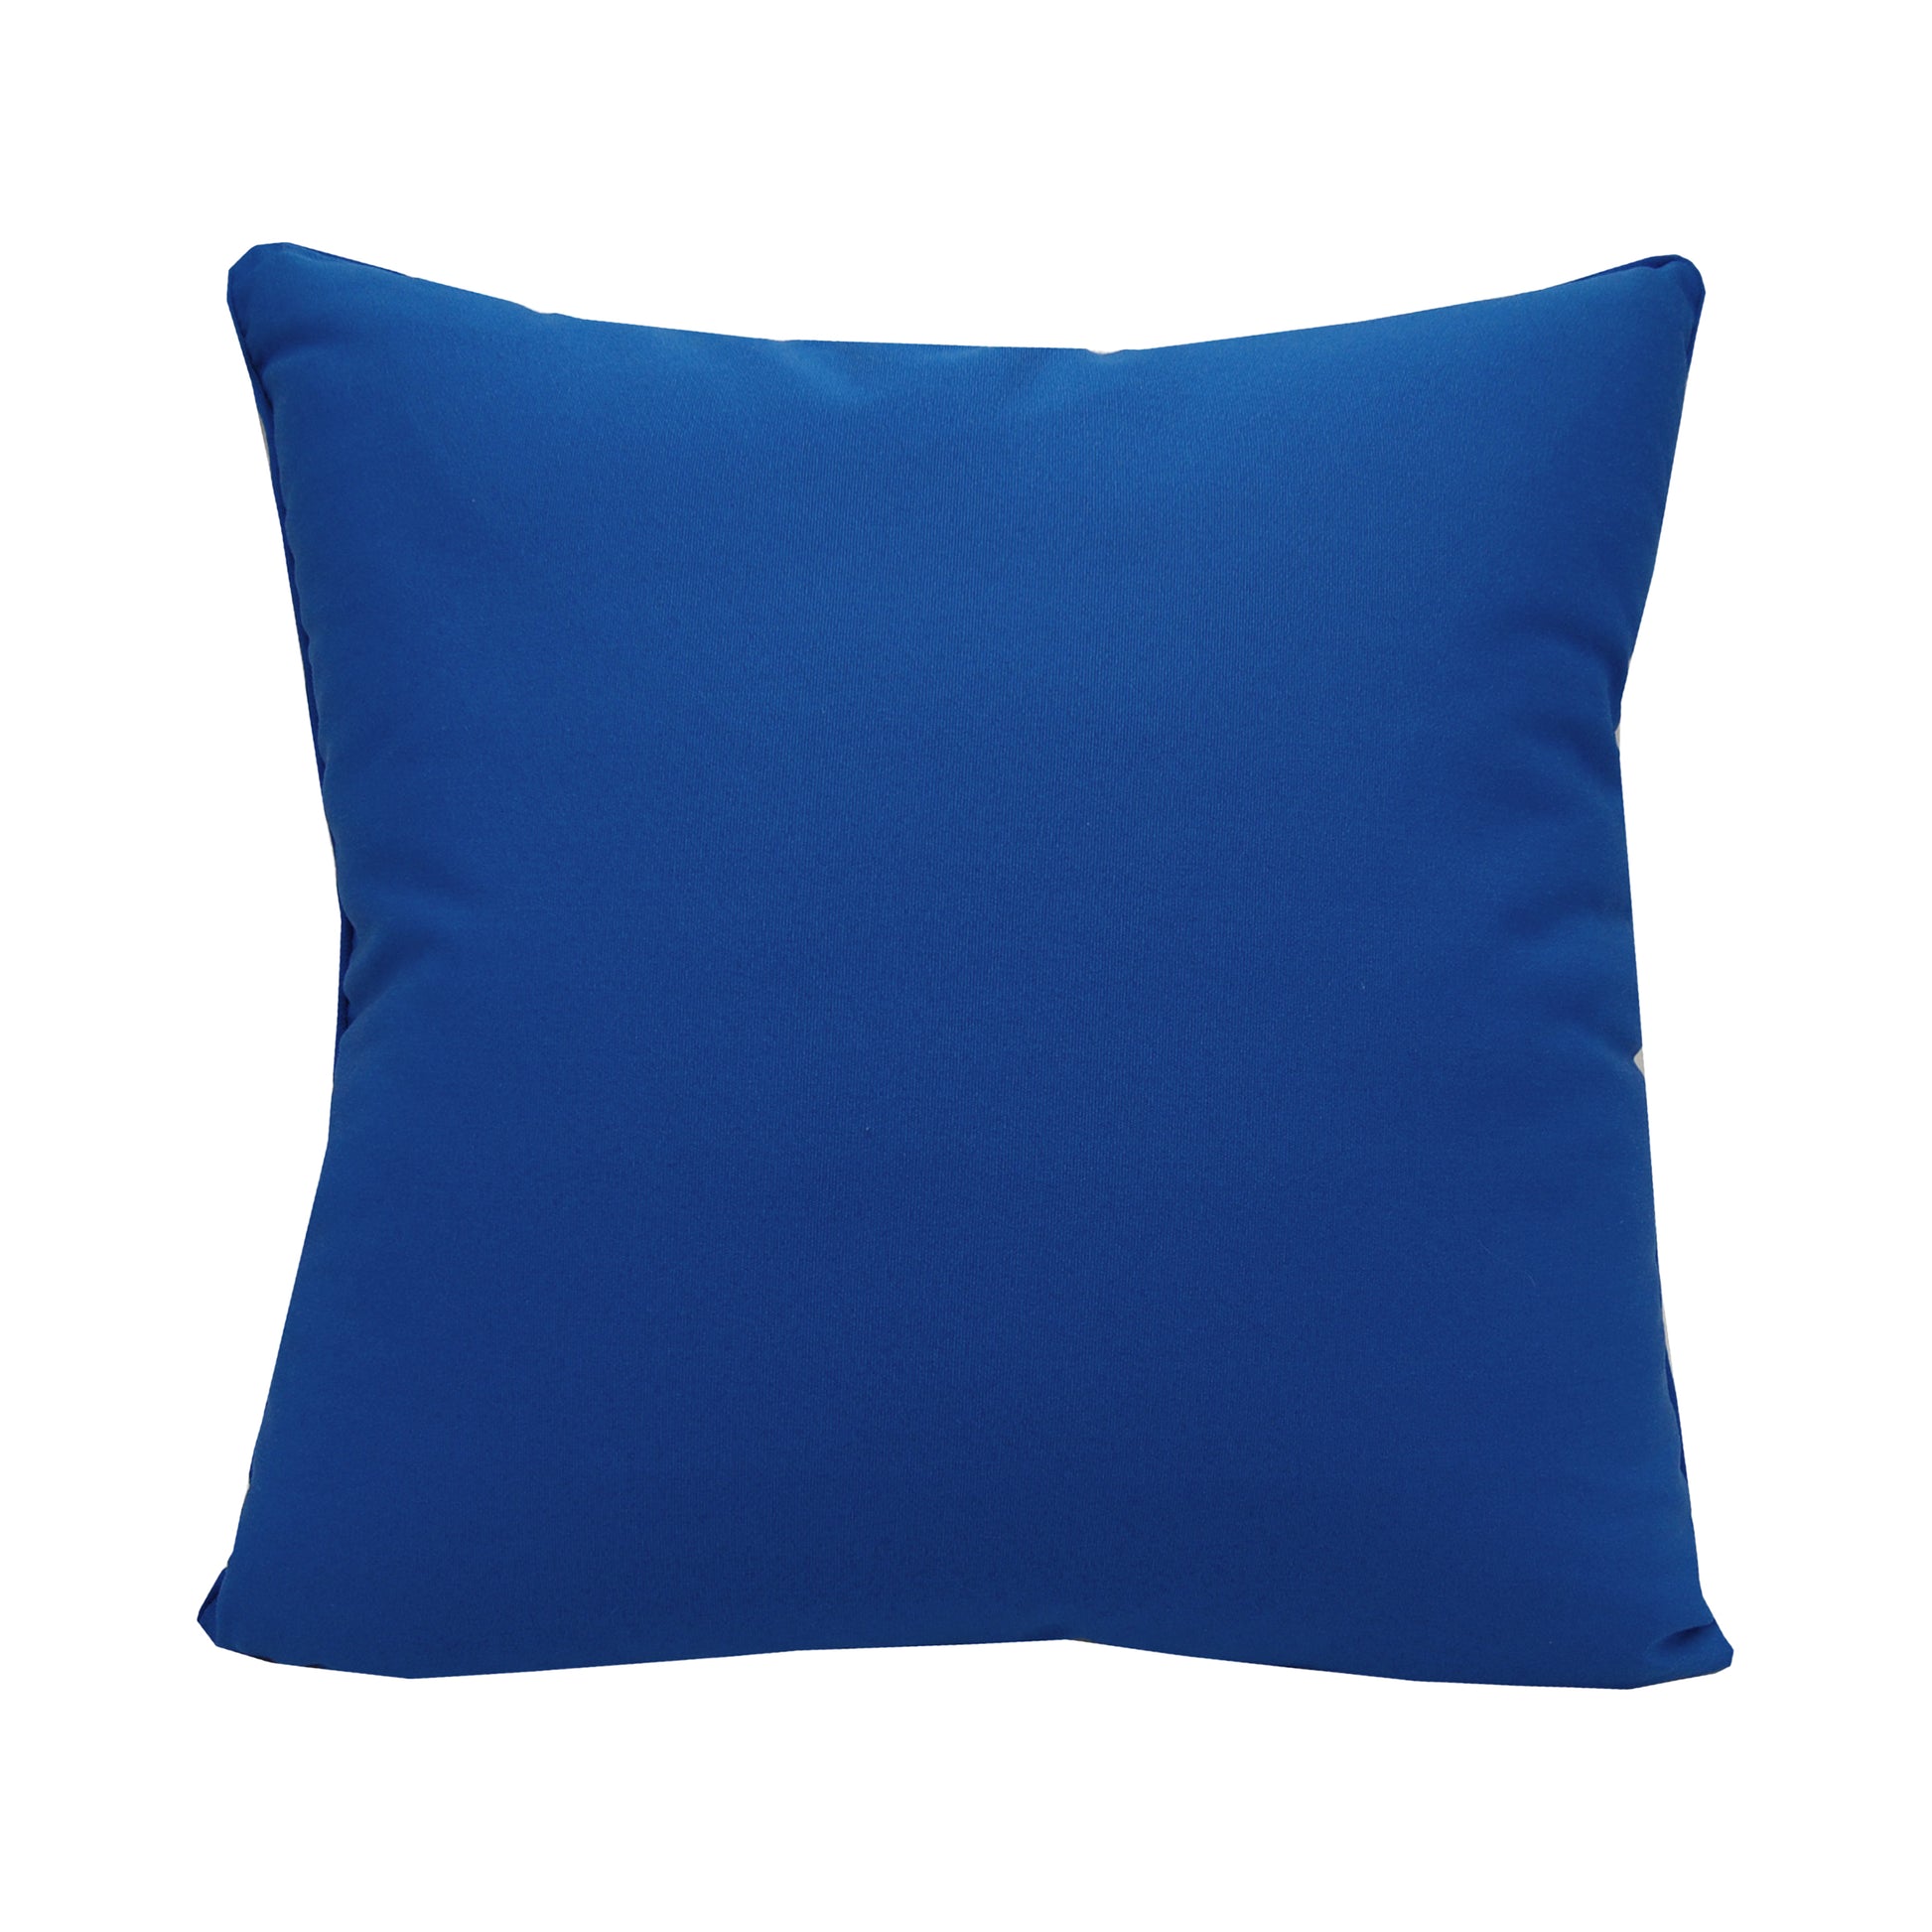 Solid blue fabric; back side of Blue Jellyfish outdoor pillow.